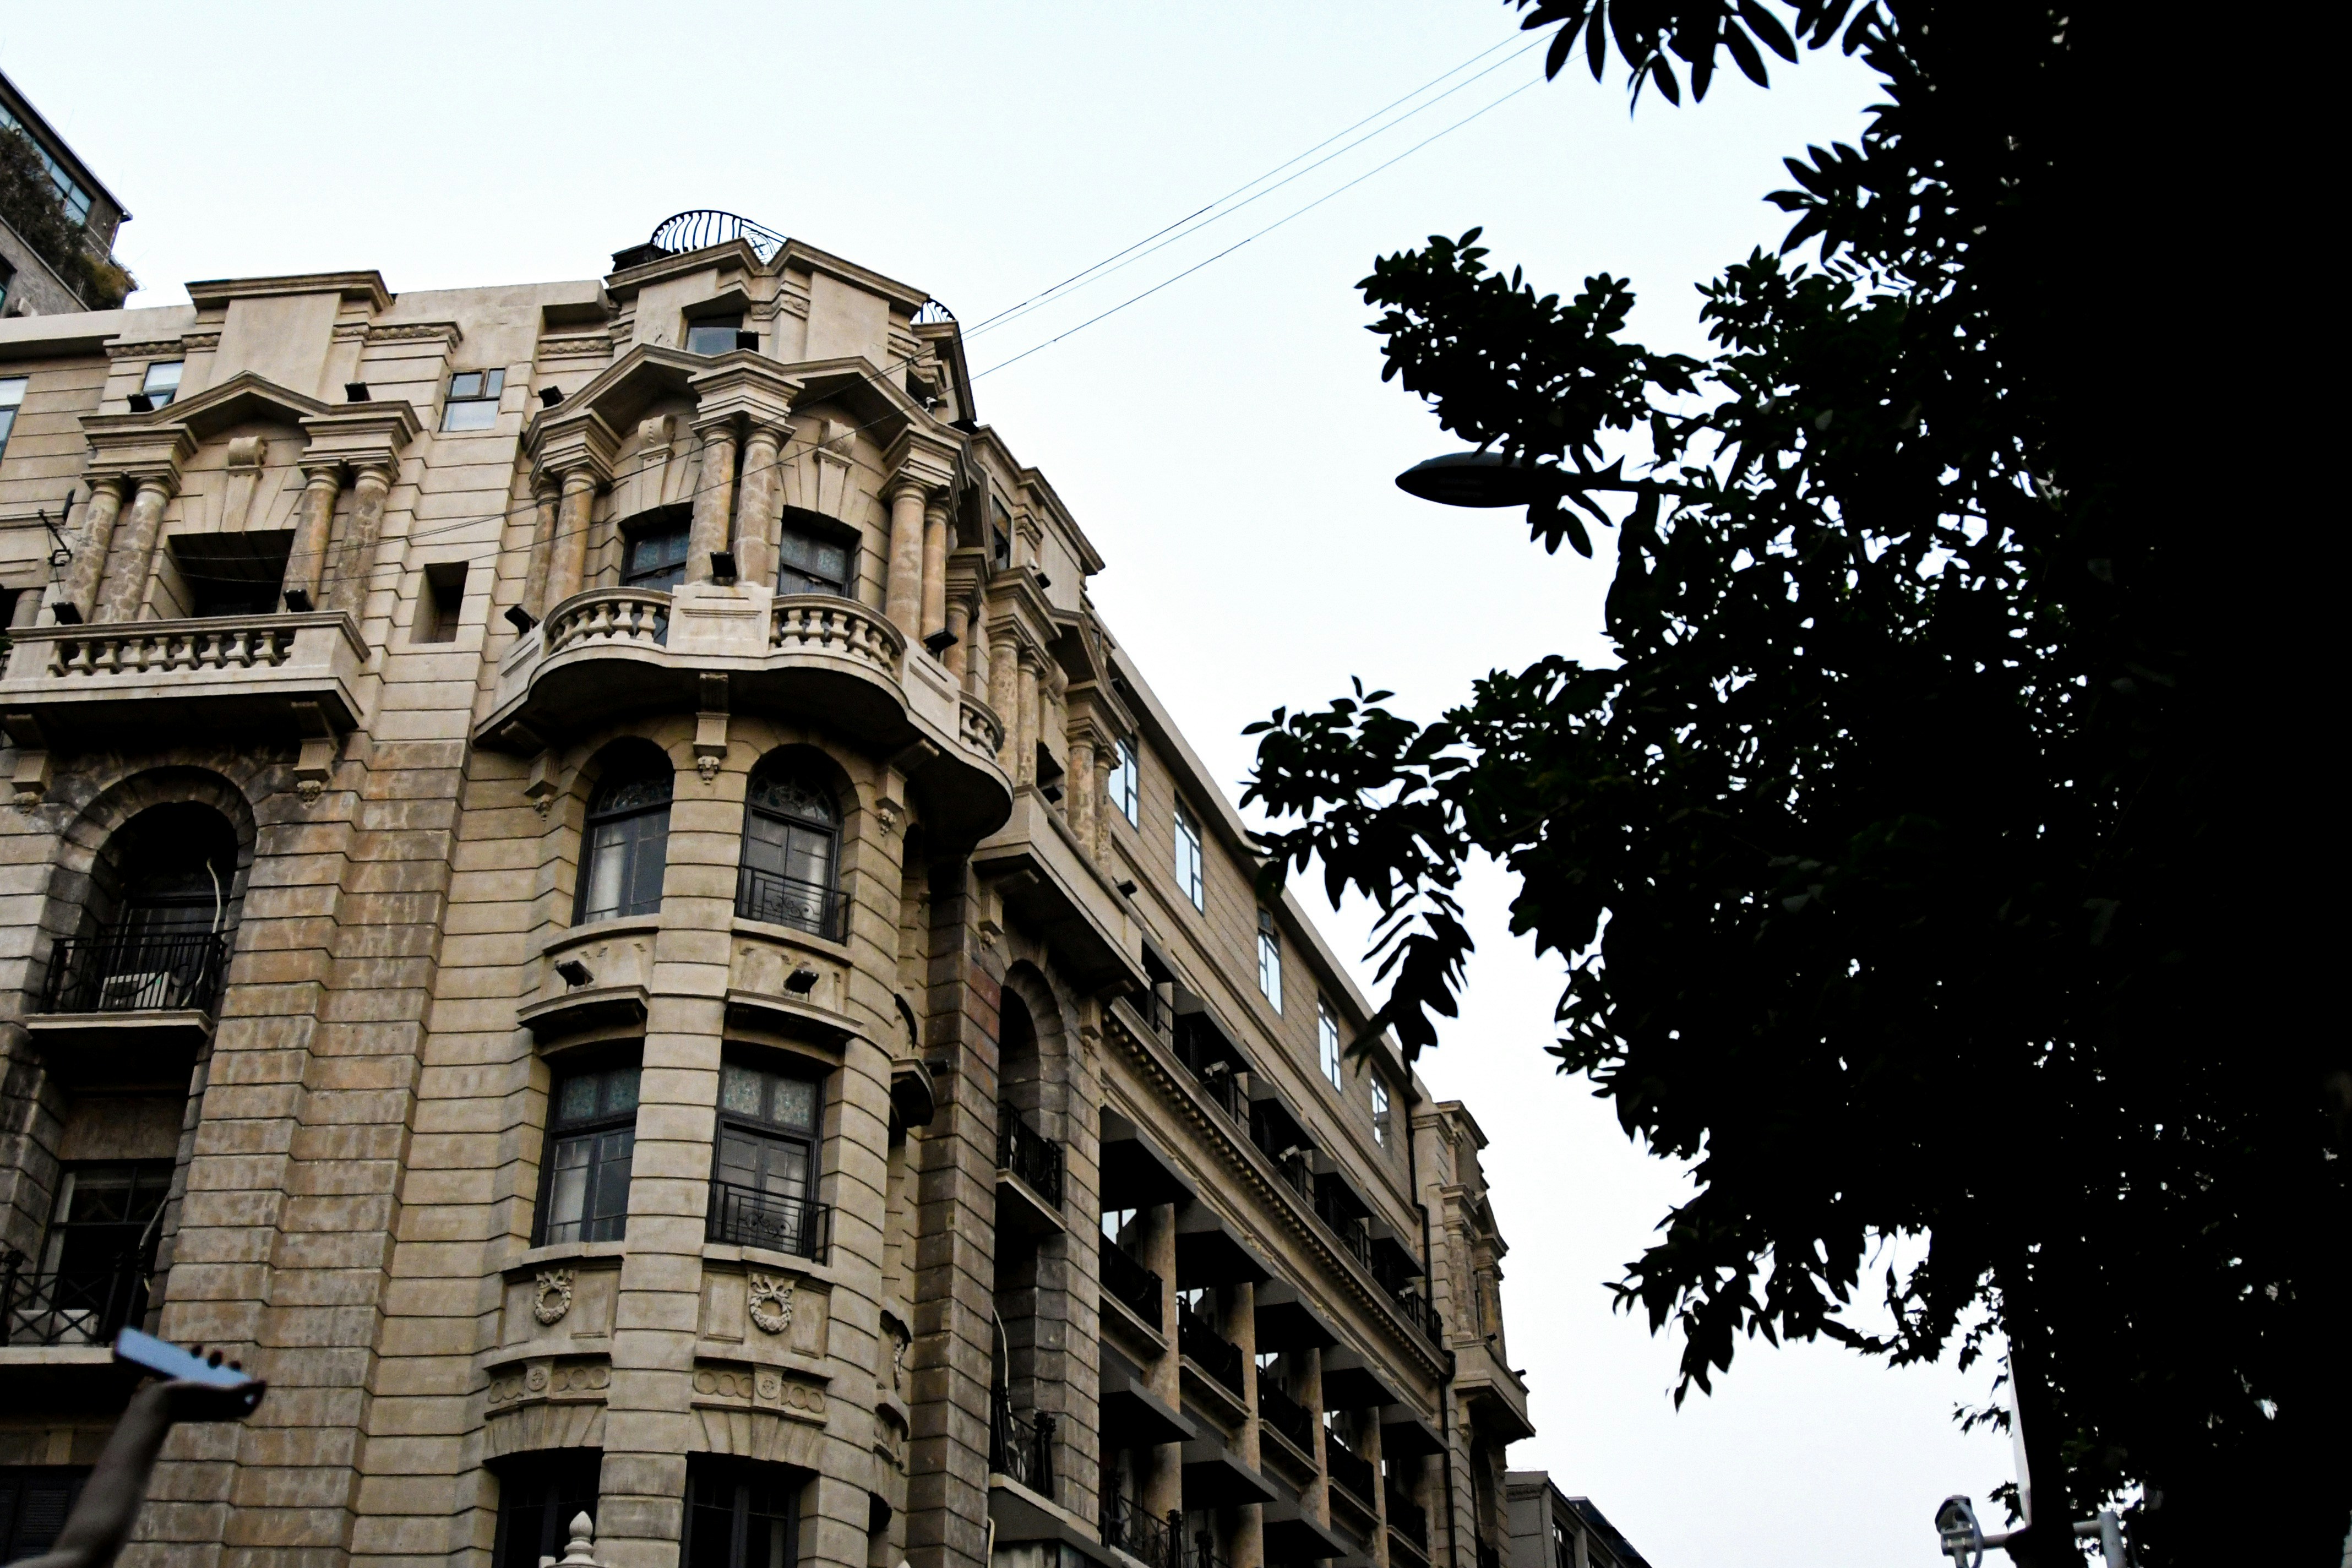 It is a classical architecture, built in 1914, completed in 1915. The facade of the building eliminates the classical column style, but still presents a three-section composition. In 1910, the British security insurance company in han opened the Baoan Foreign Firm Former Sire, mainly engaged in various insurance business, closed in 1922. On July 28, 1993, wuhan people's government declared it as an excellent historical building.